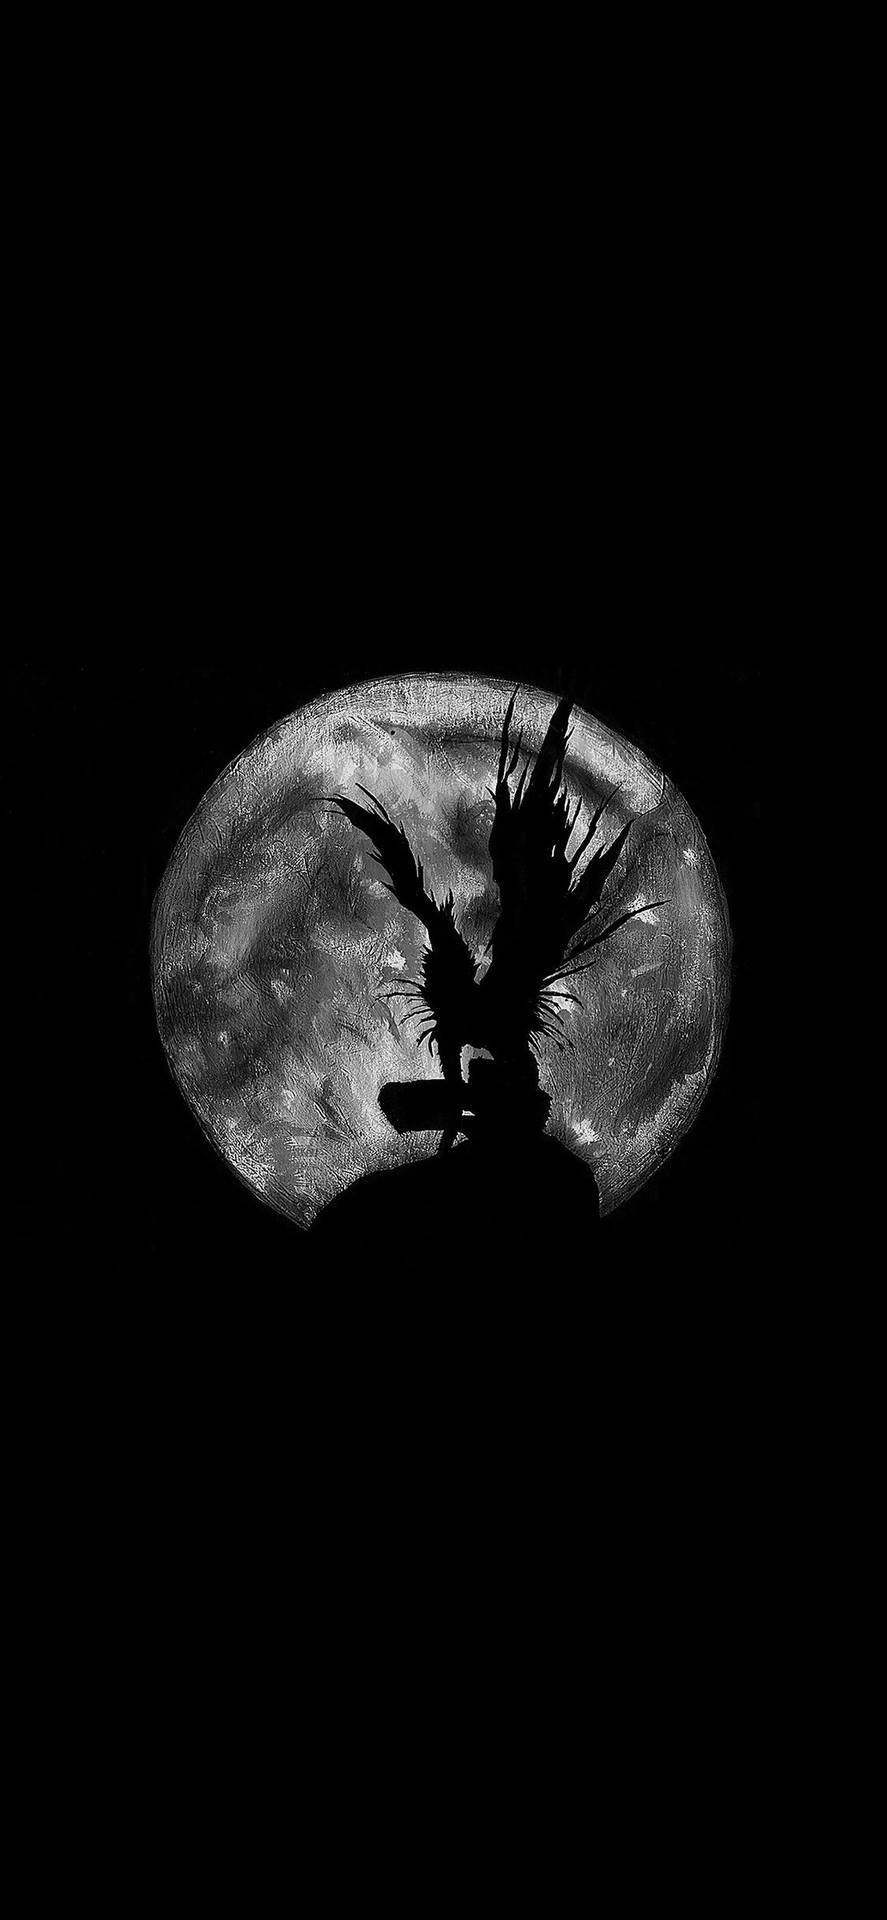 Eerie Silhouette of Ryuk from Death Note on iPhone Wallpaper